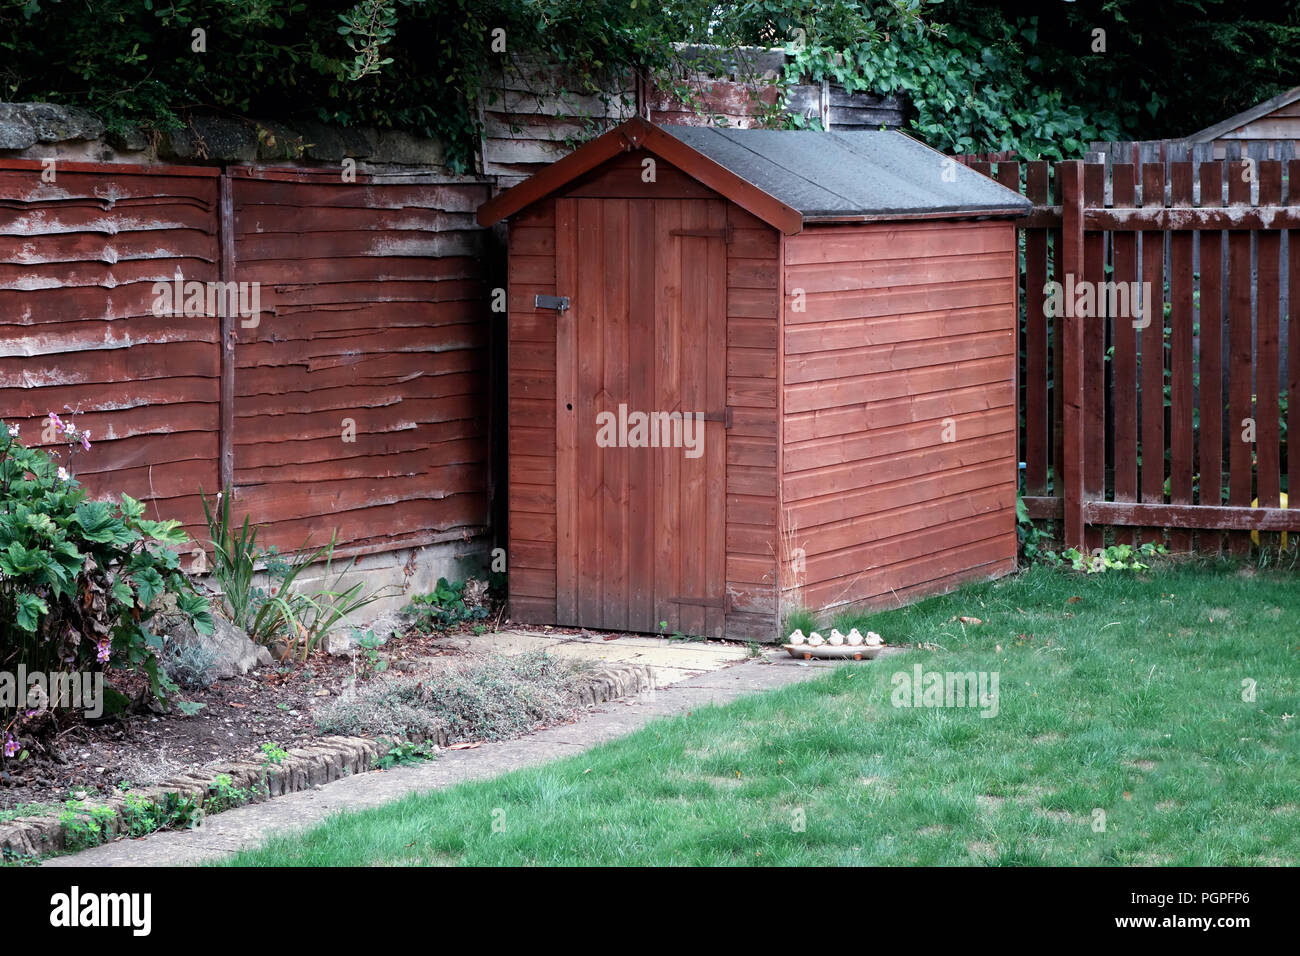 Small wooden garden shed the garden of a private house in Rotherham, South Yorkshire, England. Stock Photo